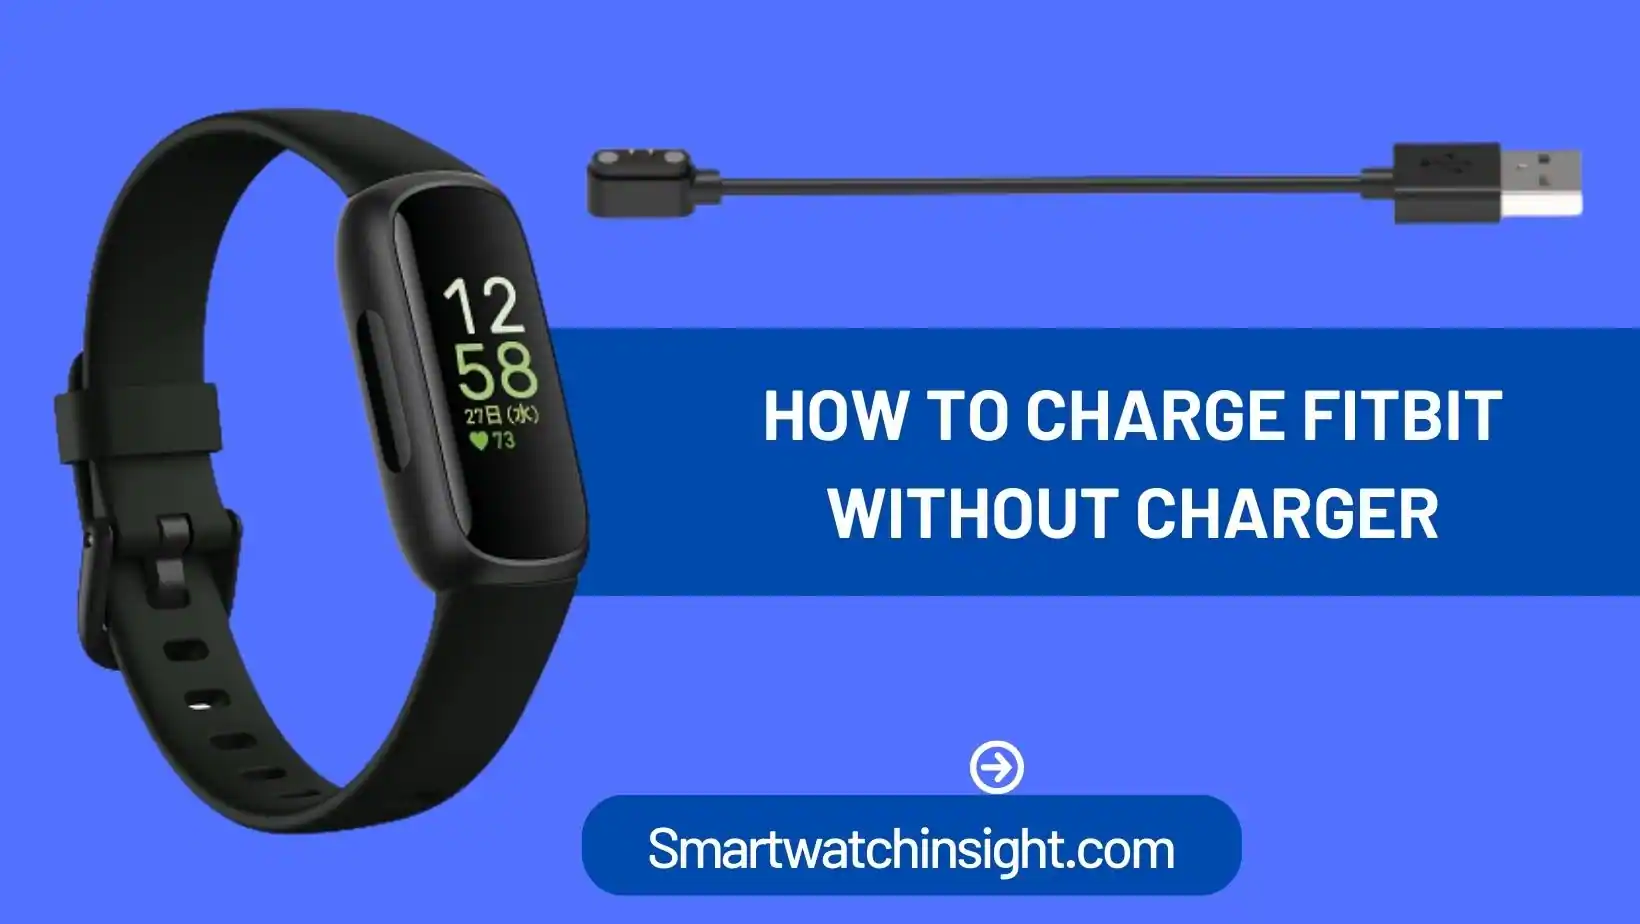 How to Charge Fitbit wihout charger